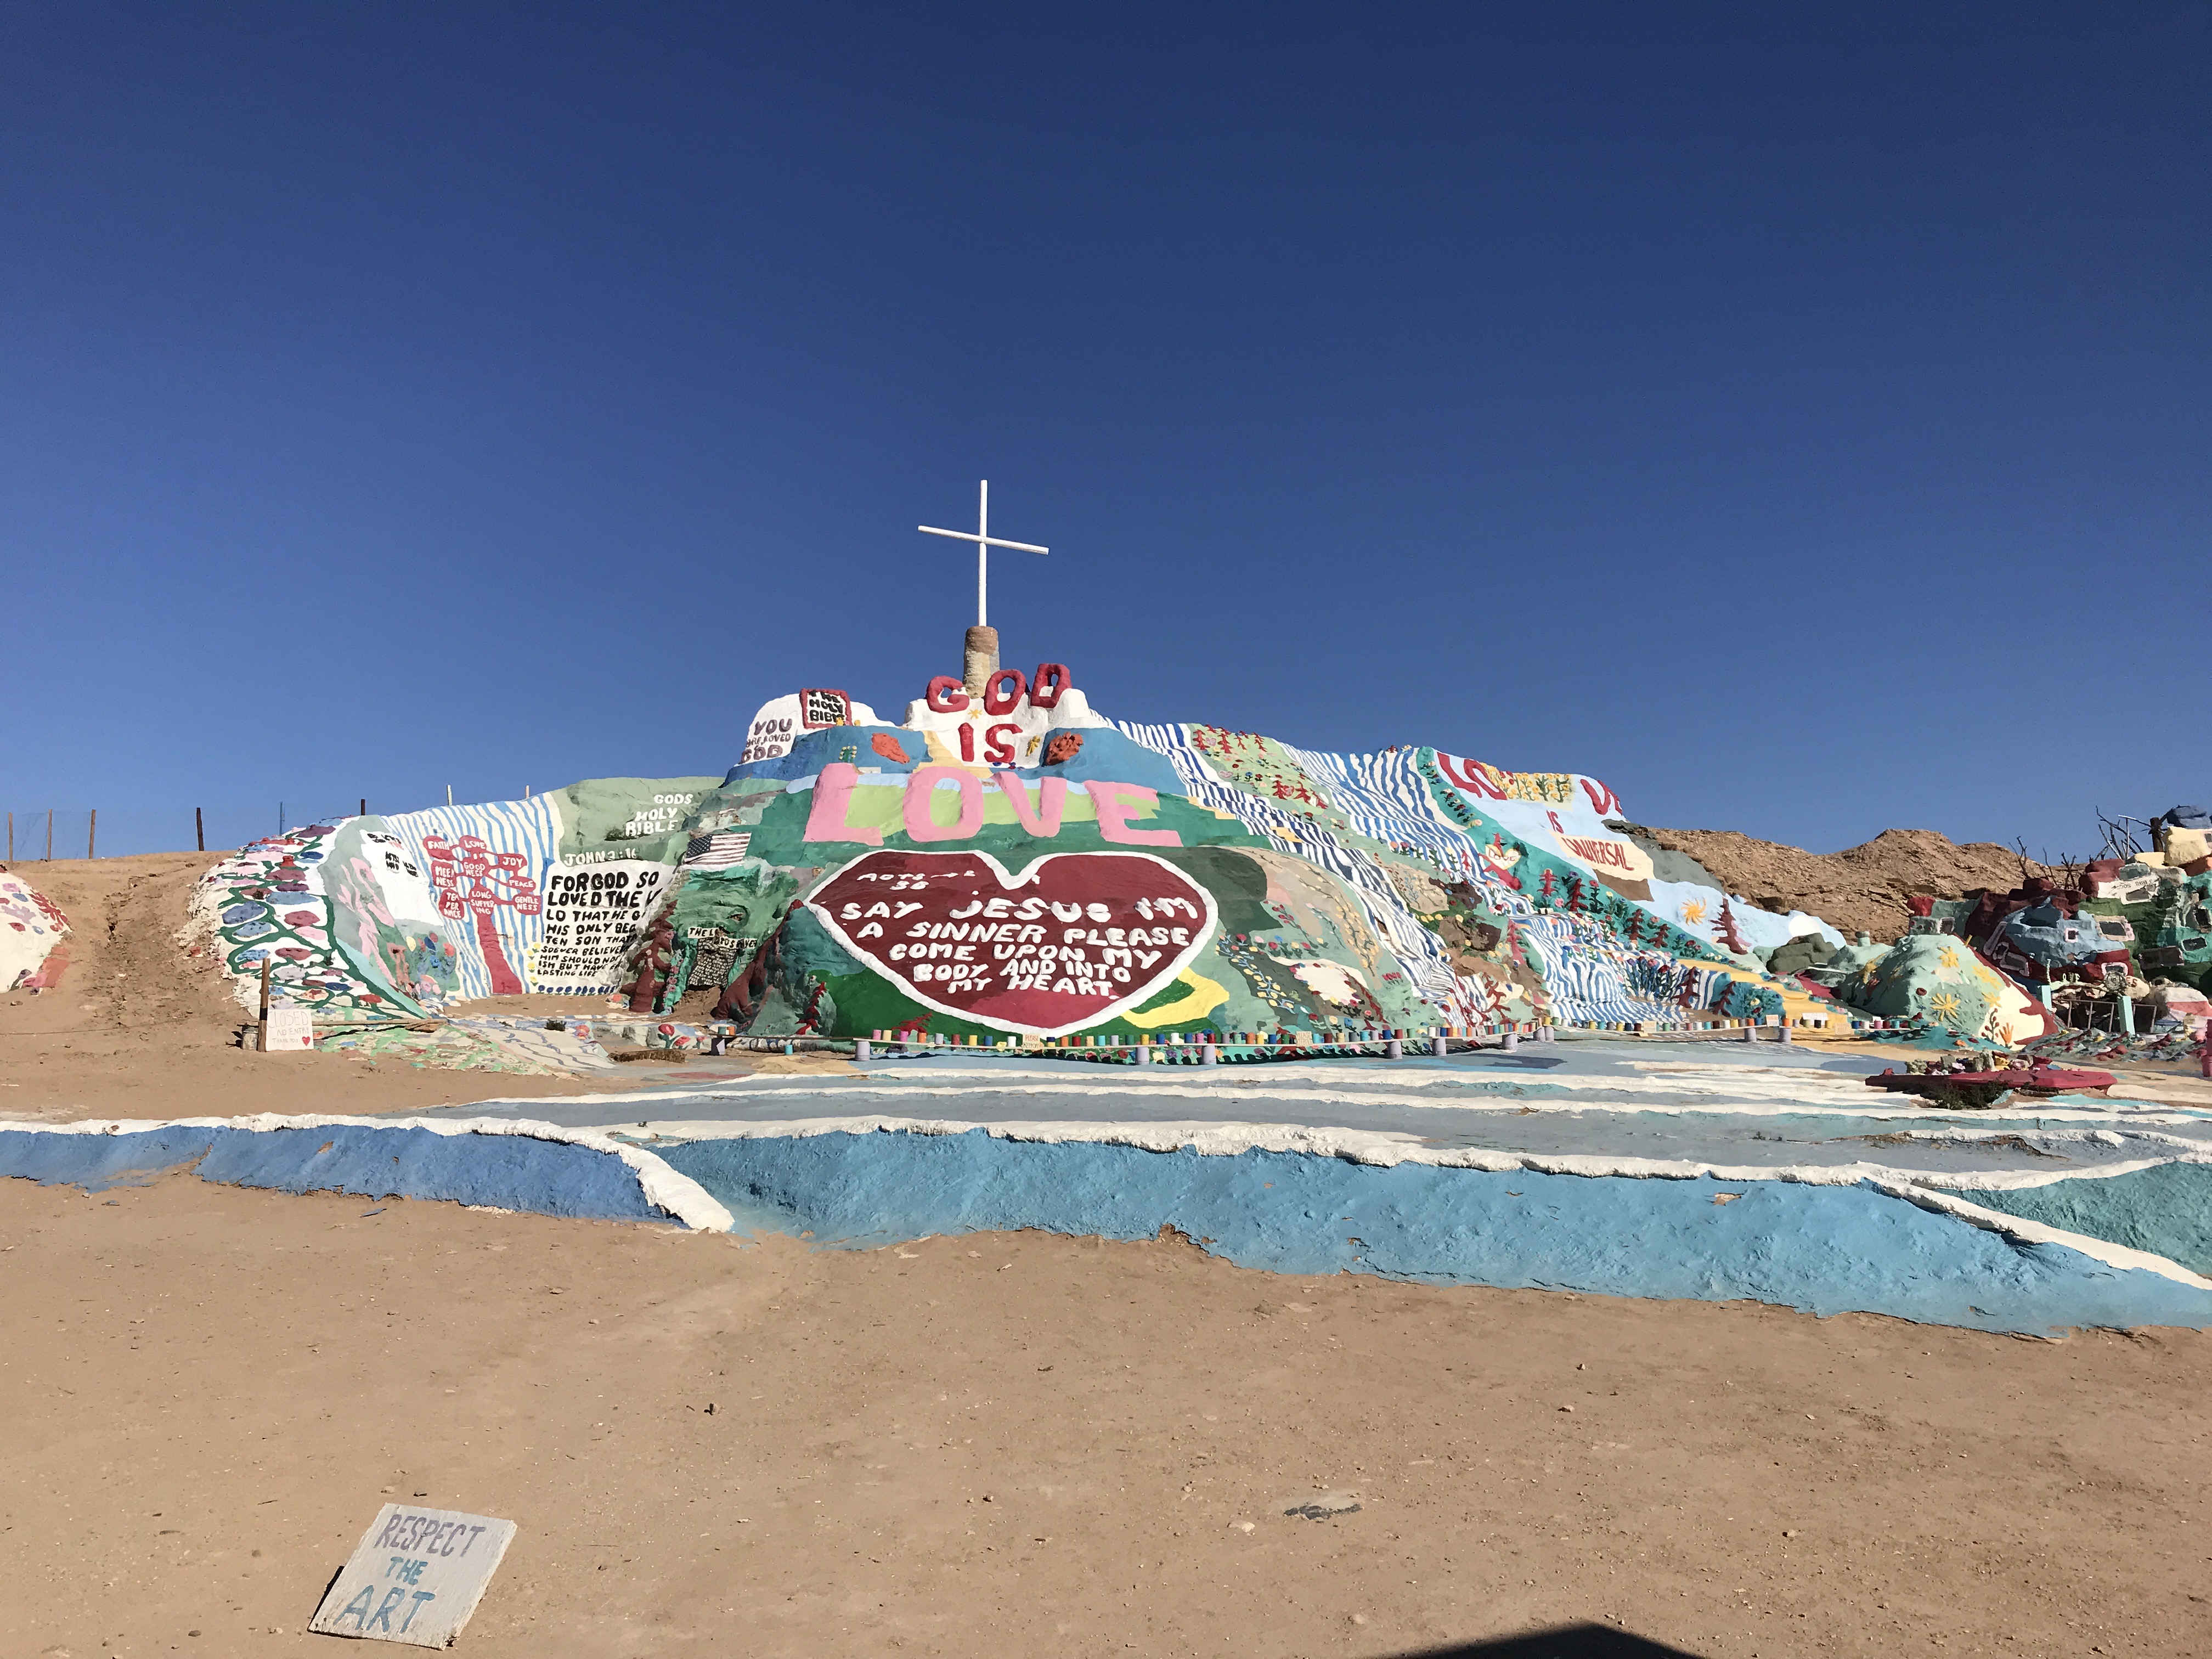 Mound covered in religious-themed graffiti and artwork.